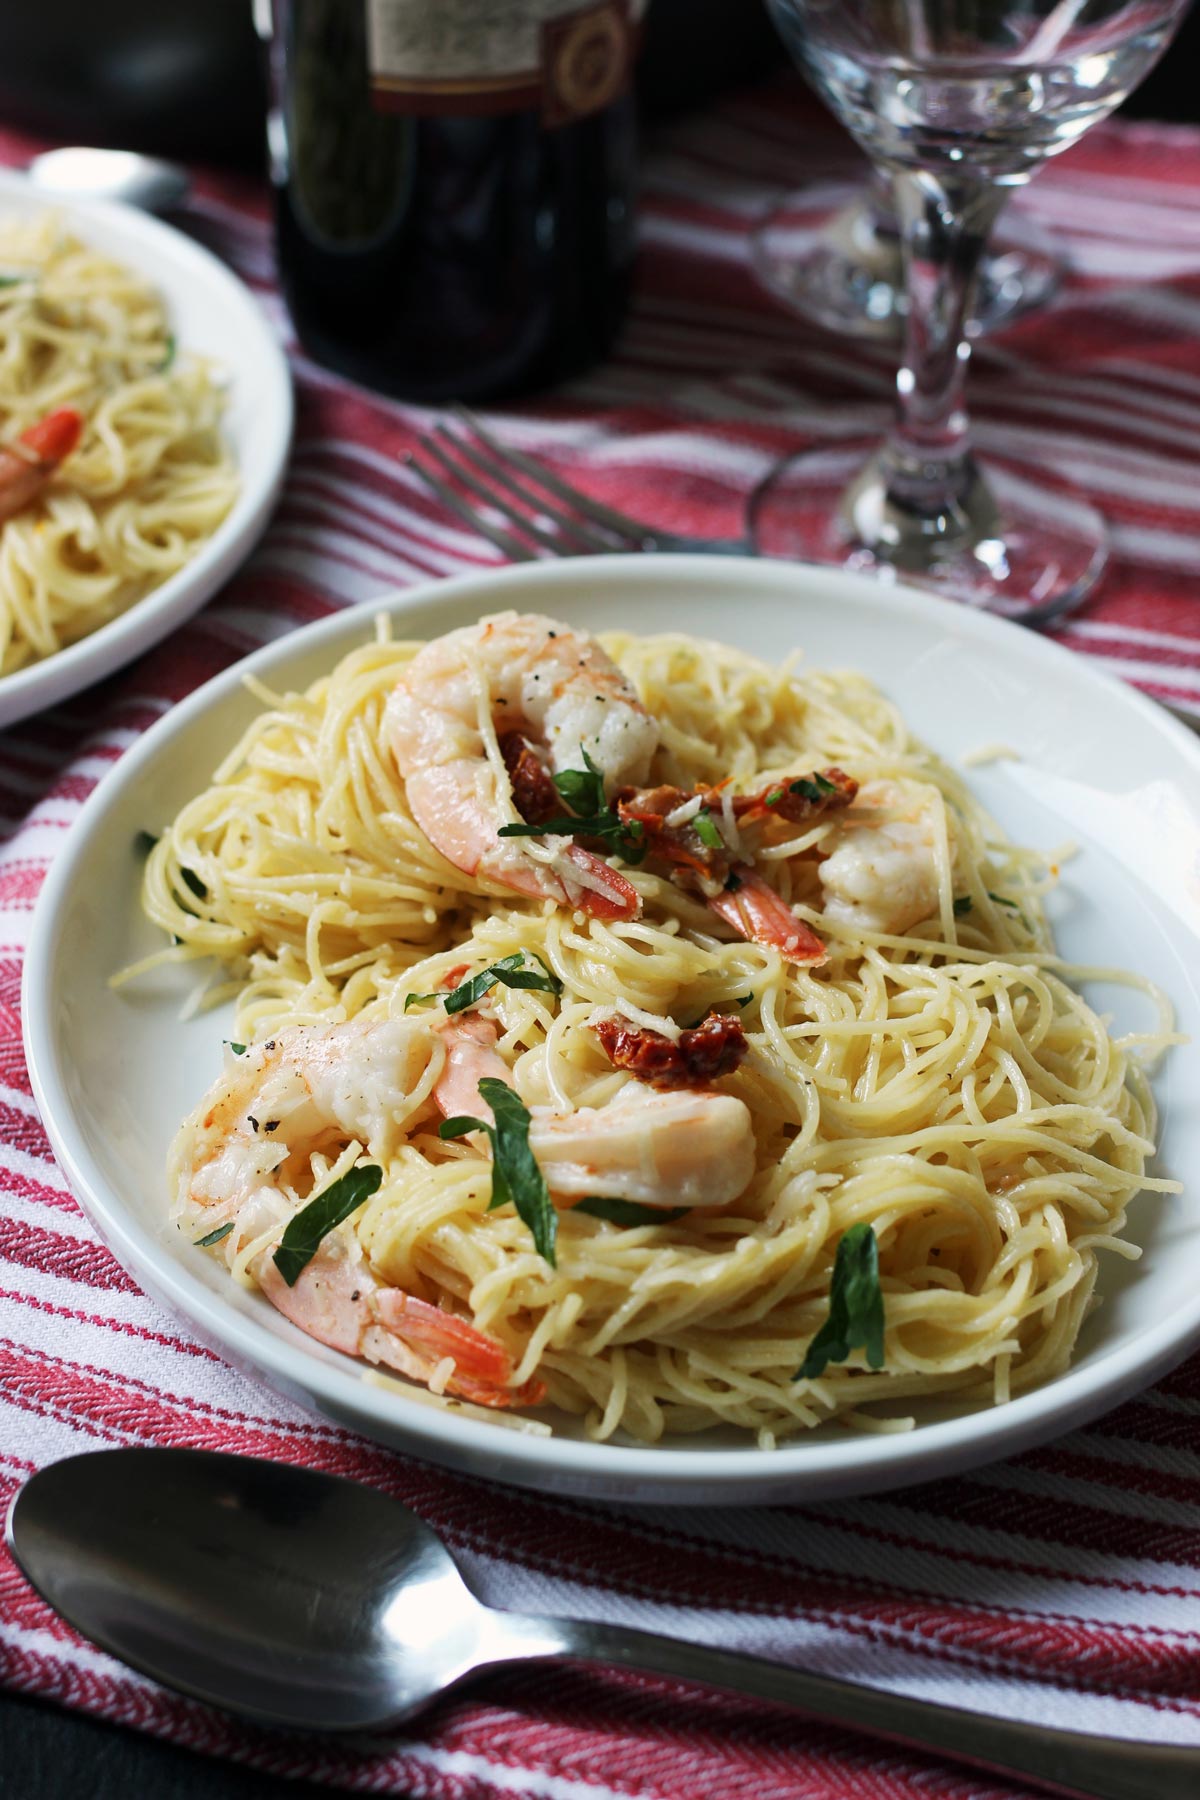 close up of a plate of shrimp pasta next to wine glass on red and white striped cloth.